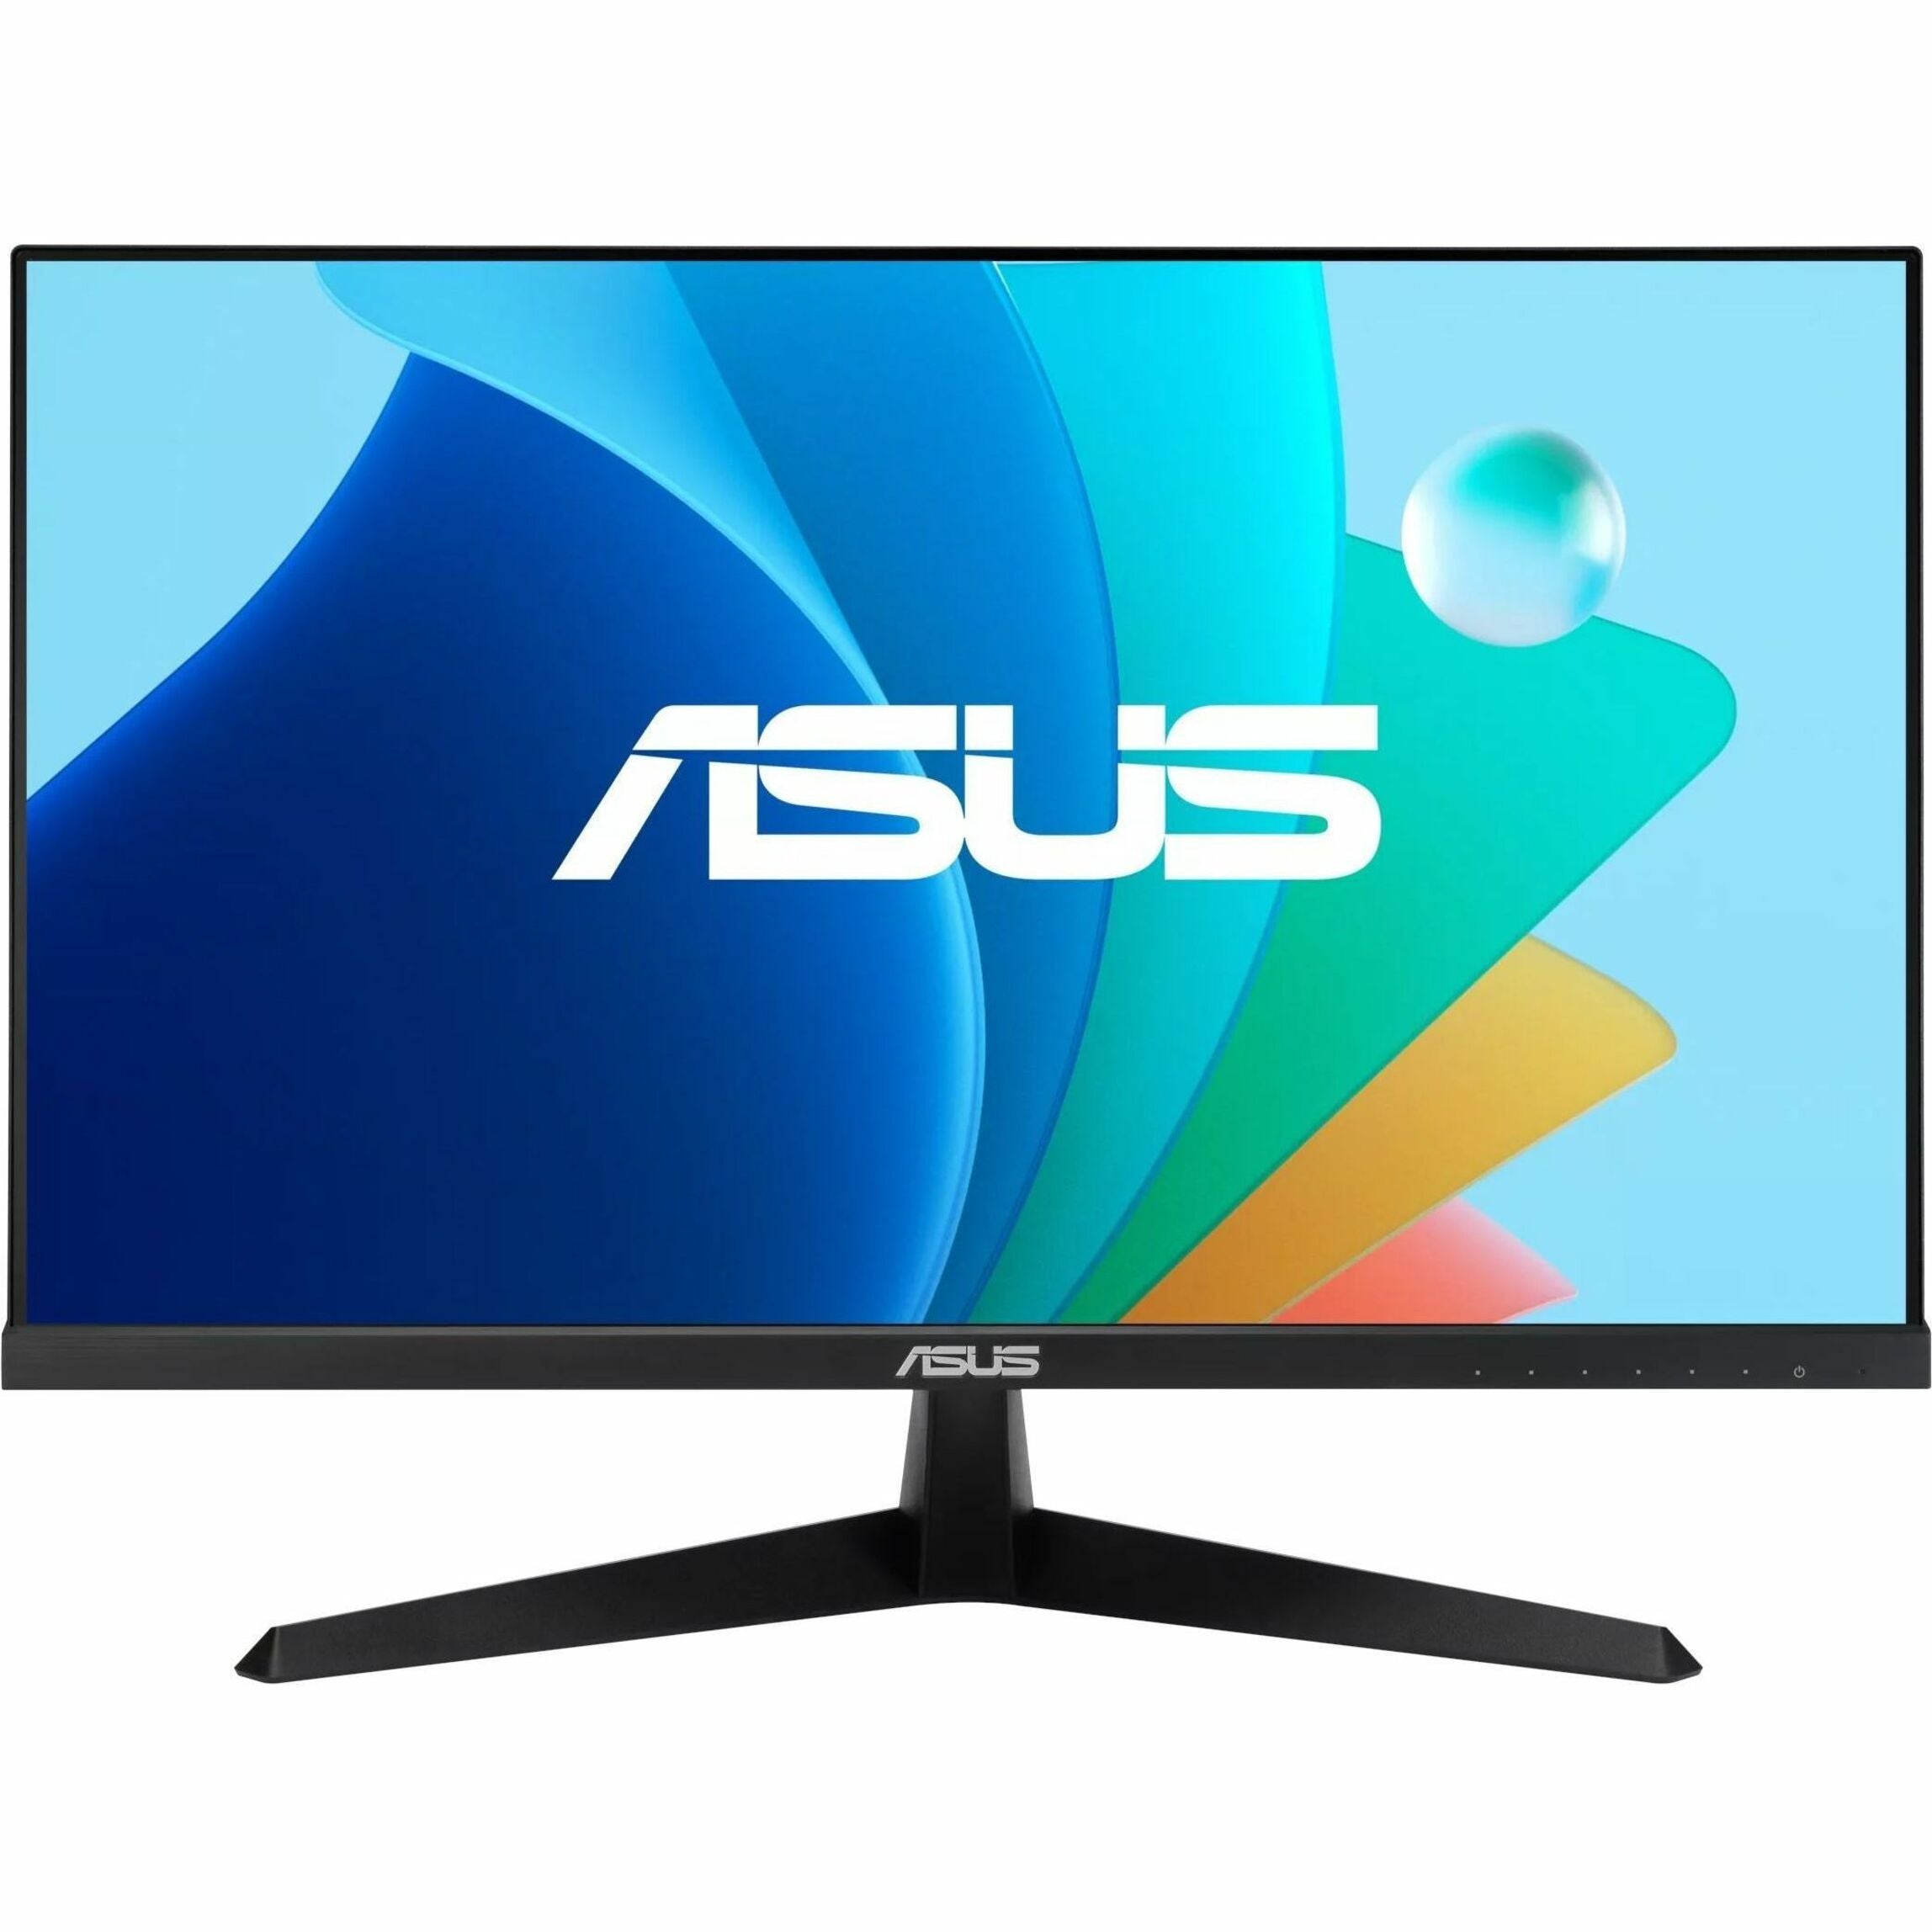 Asus VY249HF Gaming LED Monitor 24, Full HD, Adaptive Sync, 1ms Response Time, 100Hz Refresh Rate, HDMI 1.4, Energy Star, TCO Certified, 36 Month Warranty